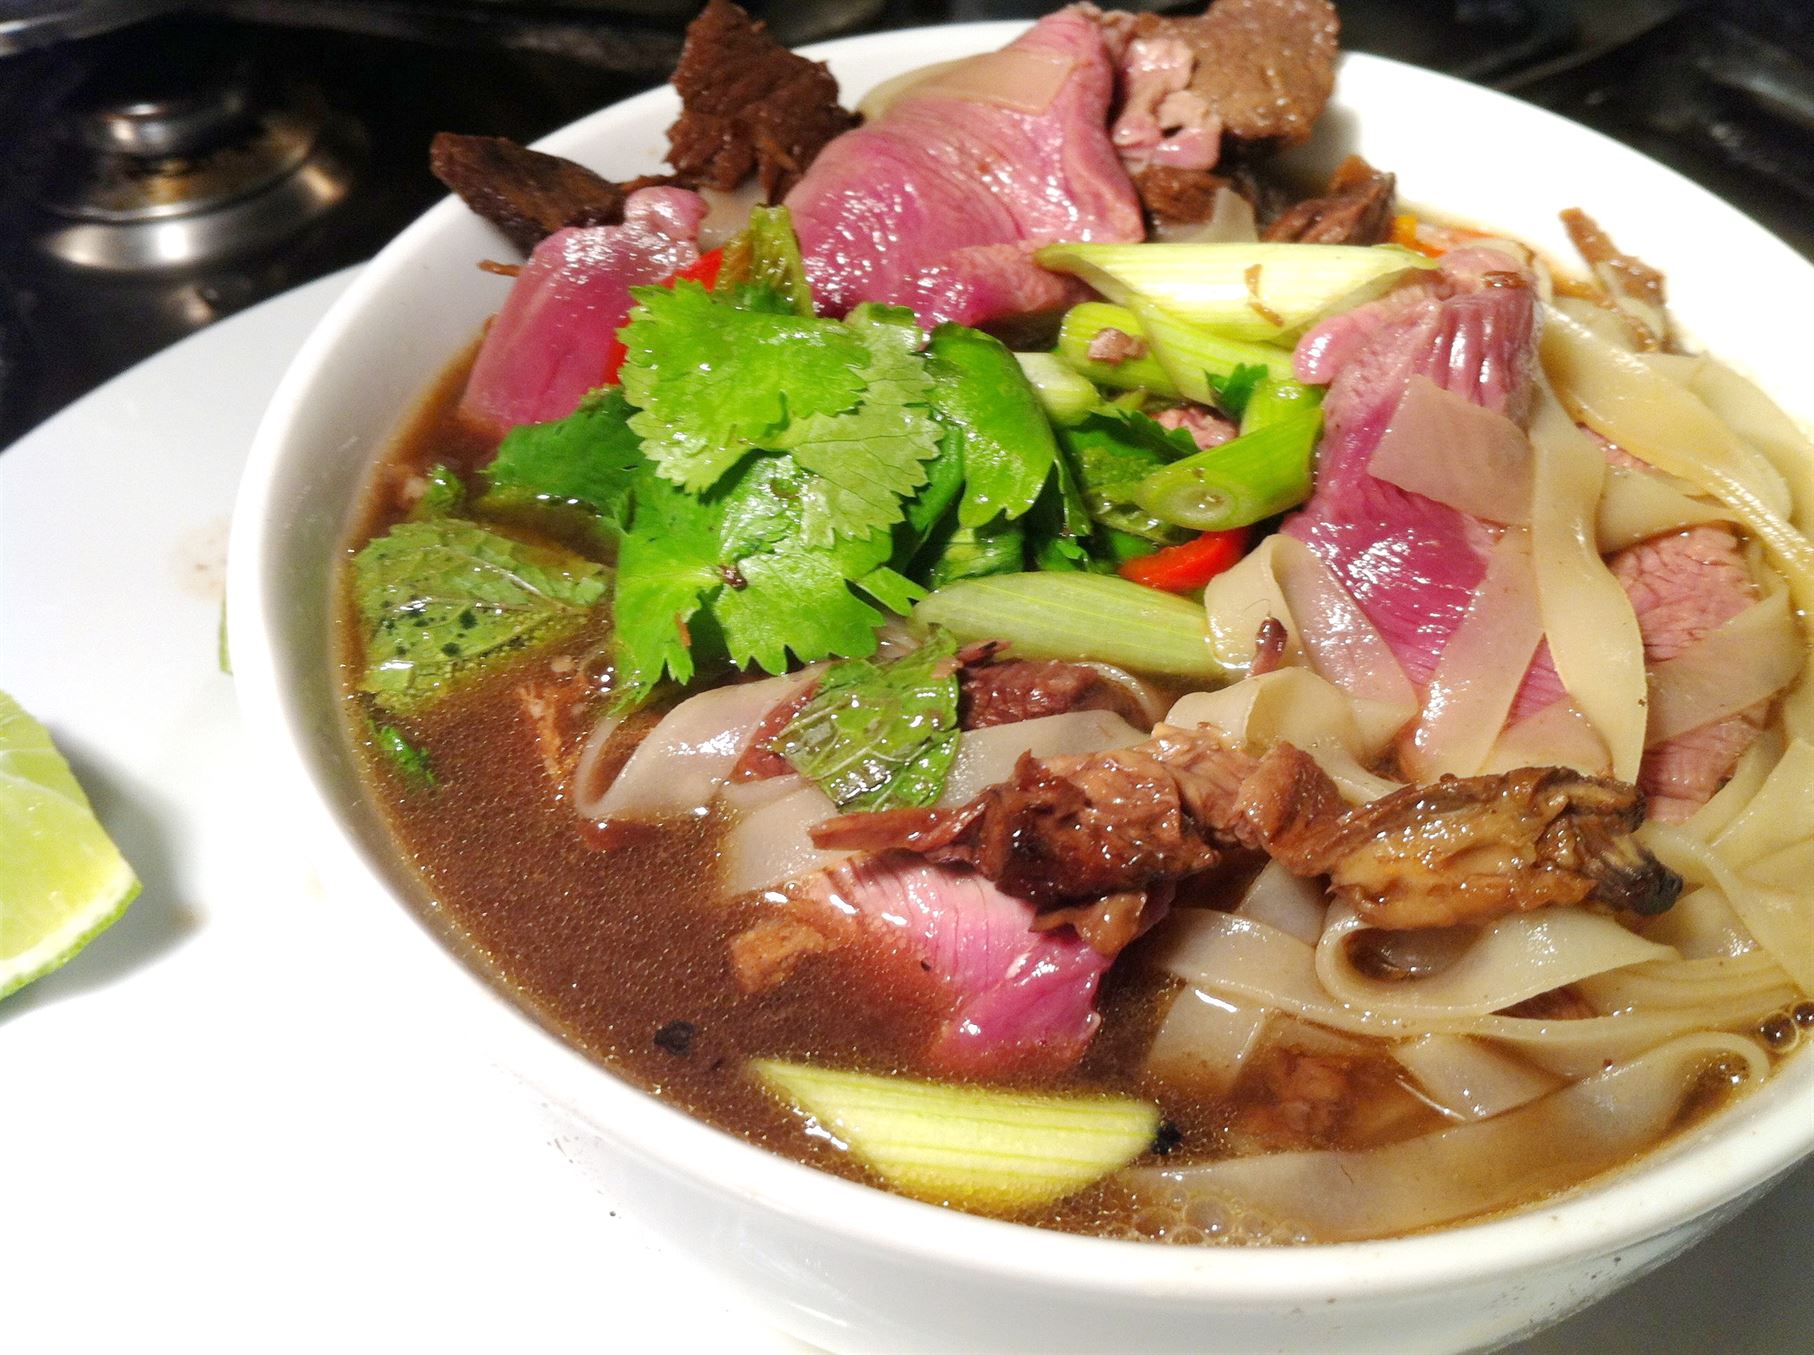 Vietnam Pho Bo (Spicy Beef and Noodle Soup), Lay The Table